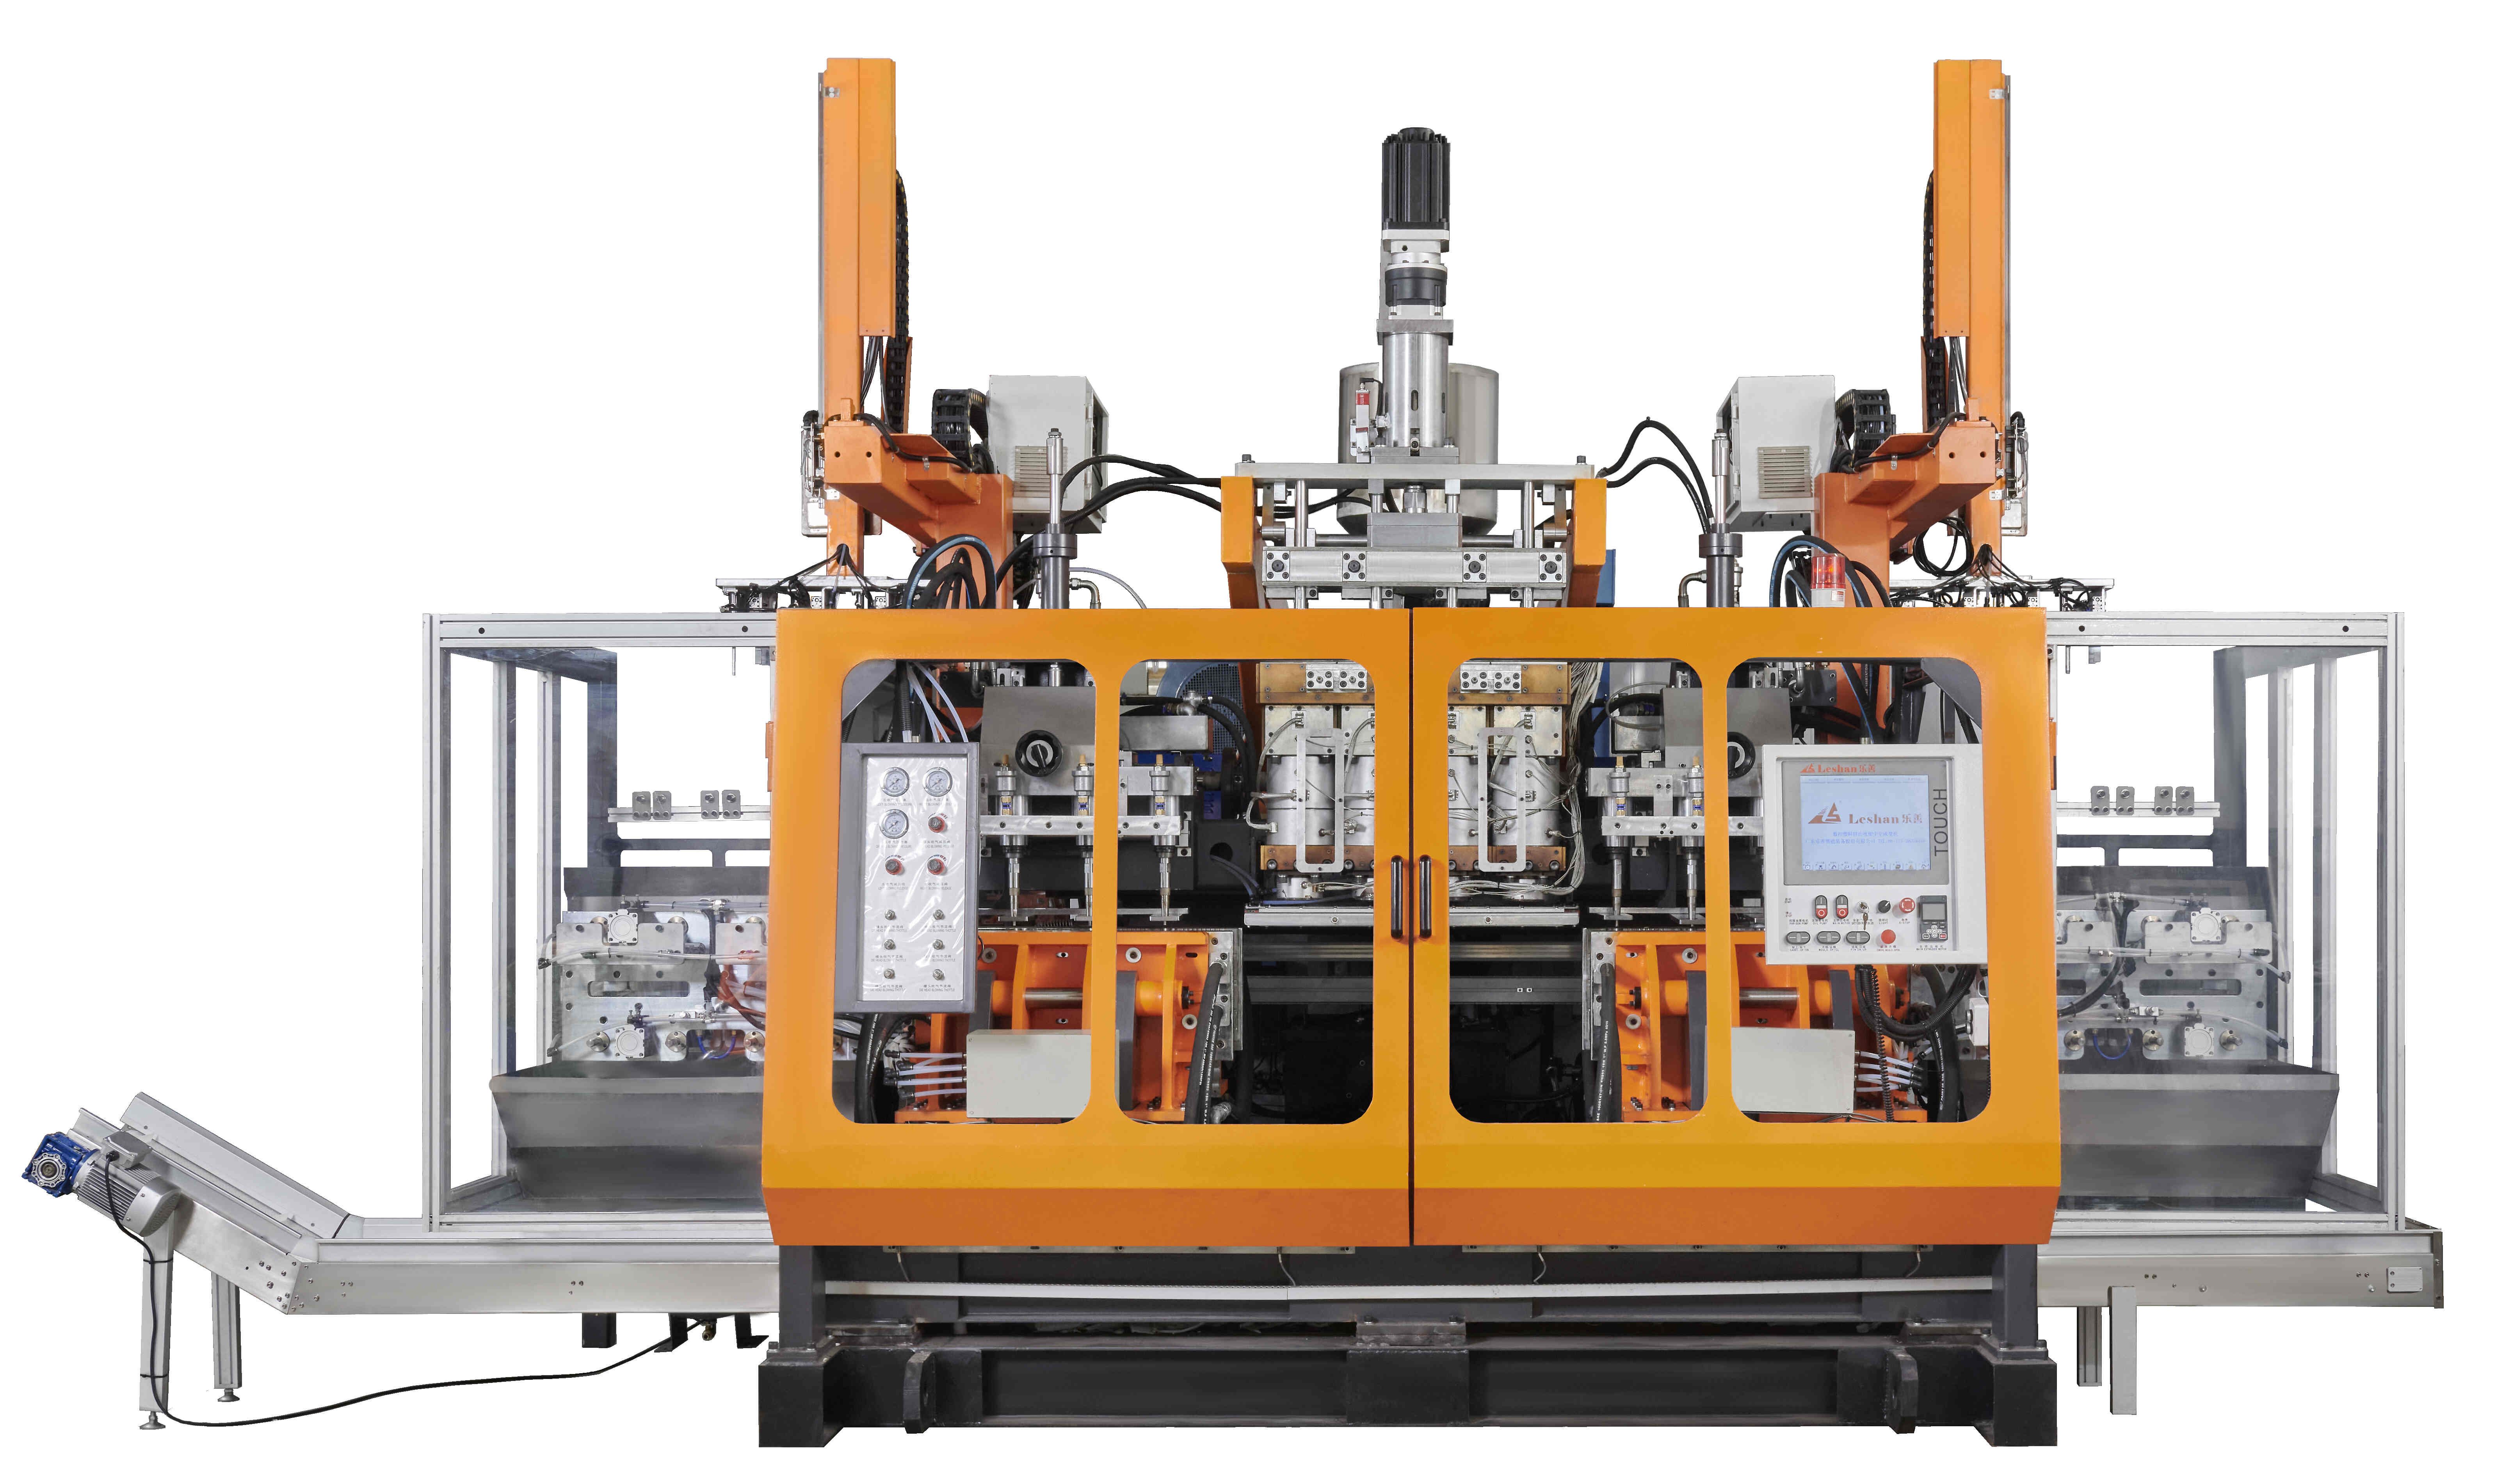 What is the working principle of a blow molding machine?